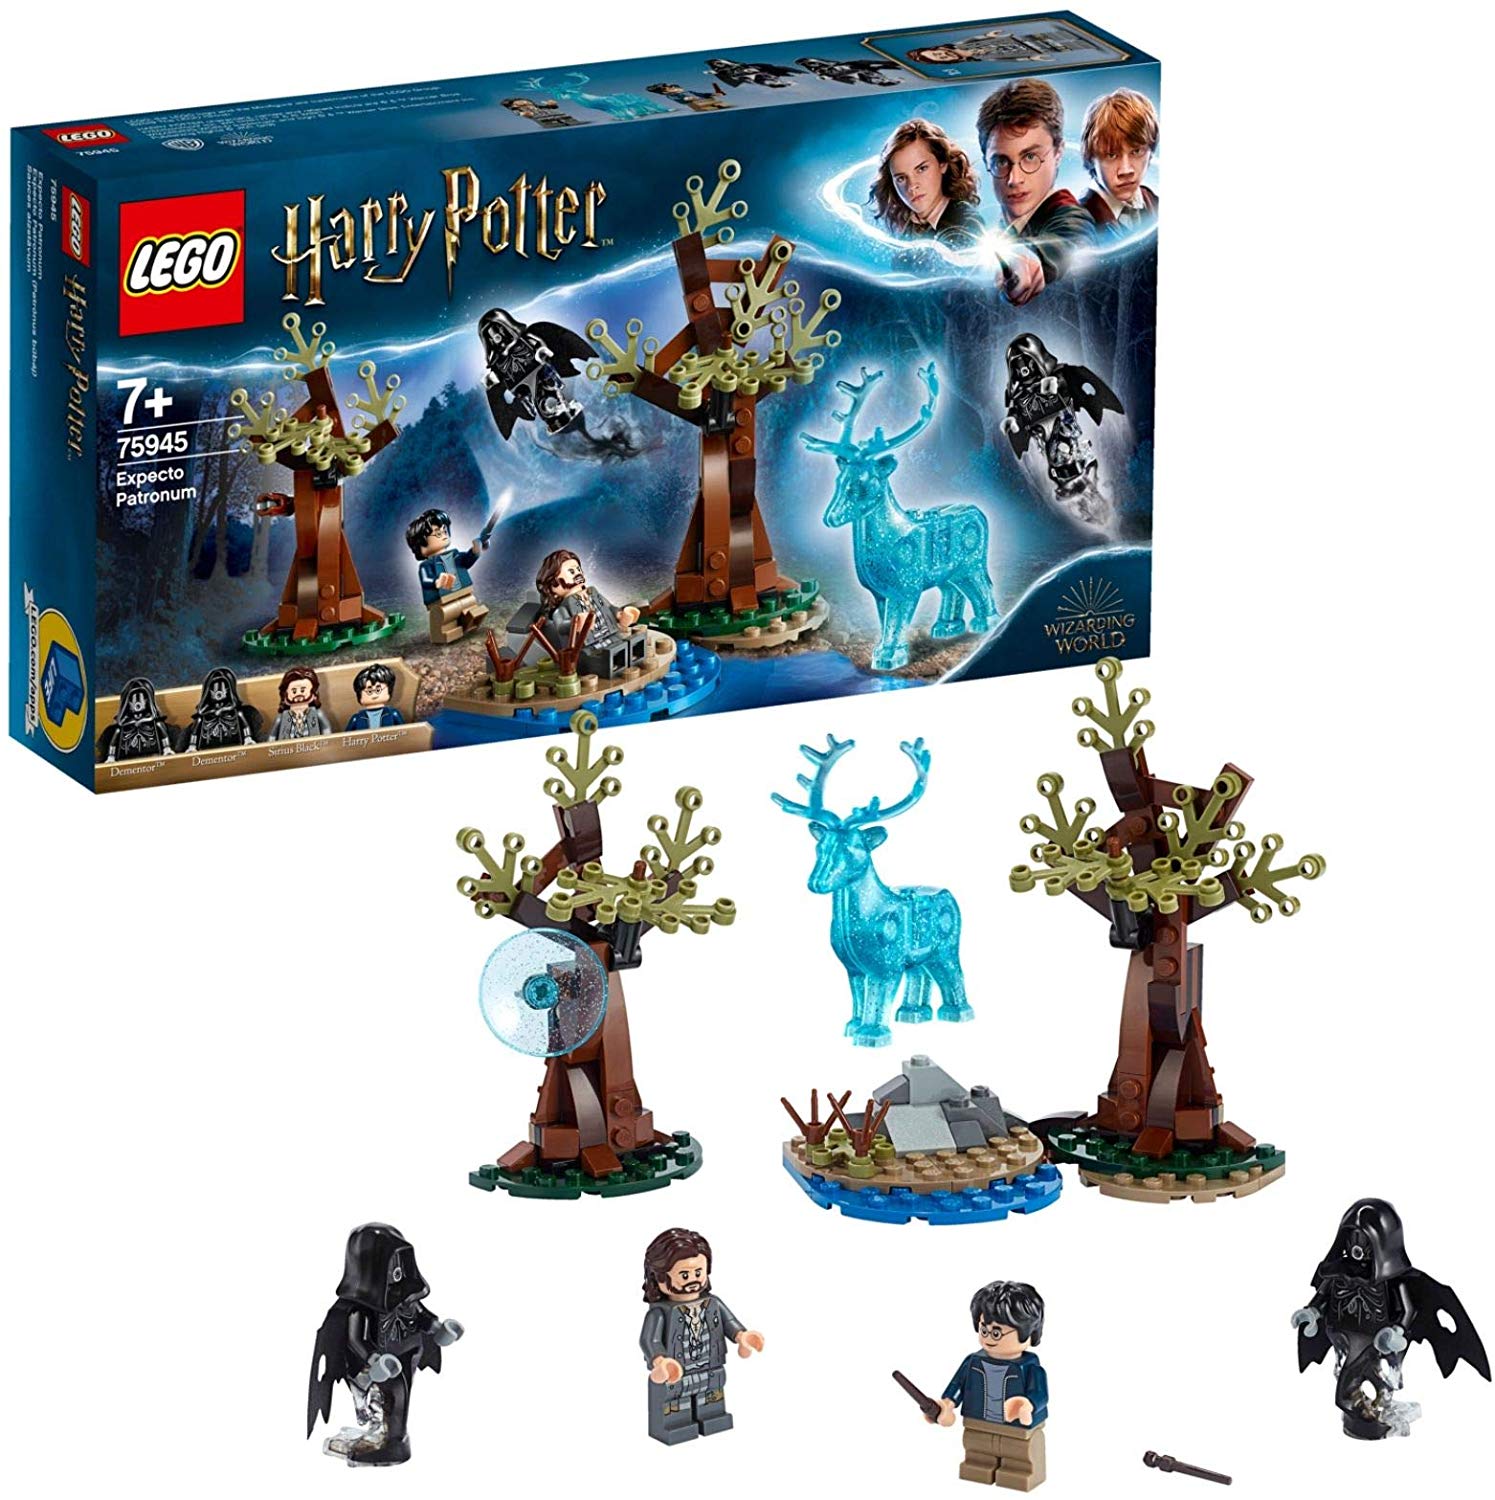 Lego 75945 Harry Potter Expecto Patronum Set With 4 Minifigures And Patronu